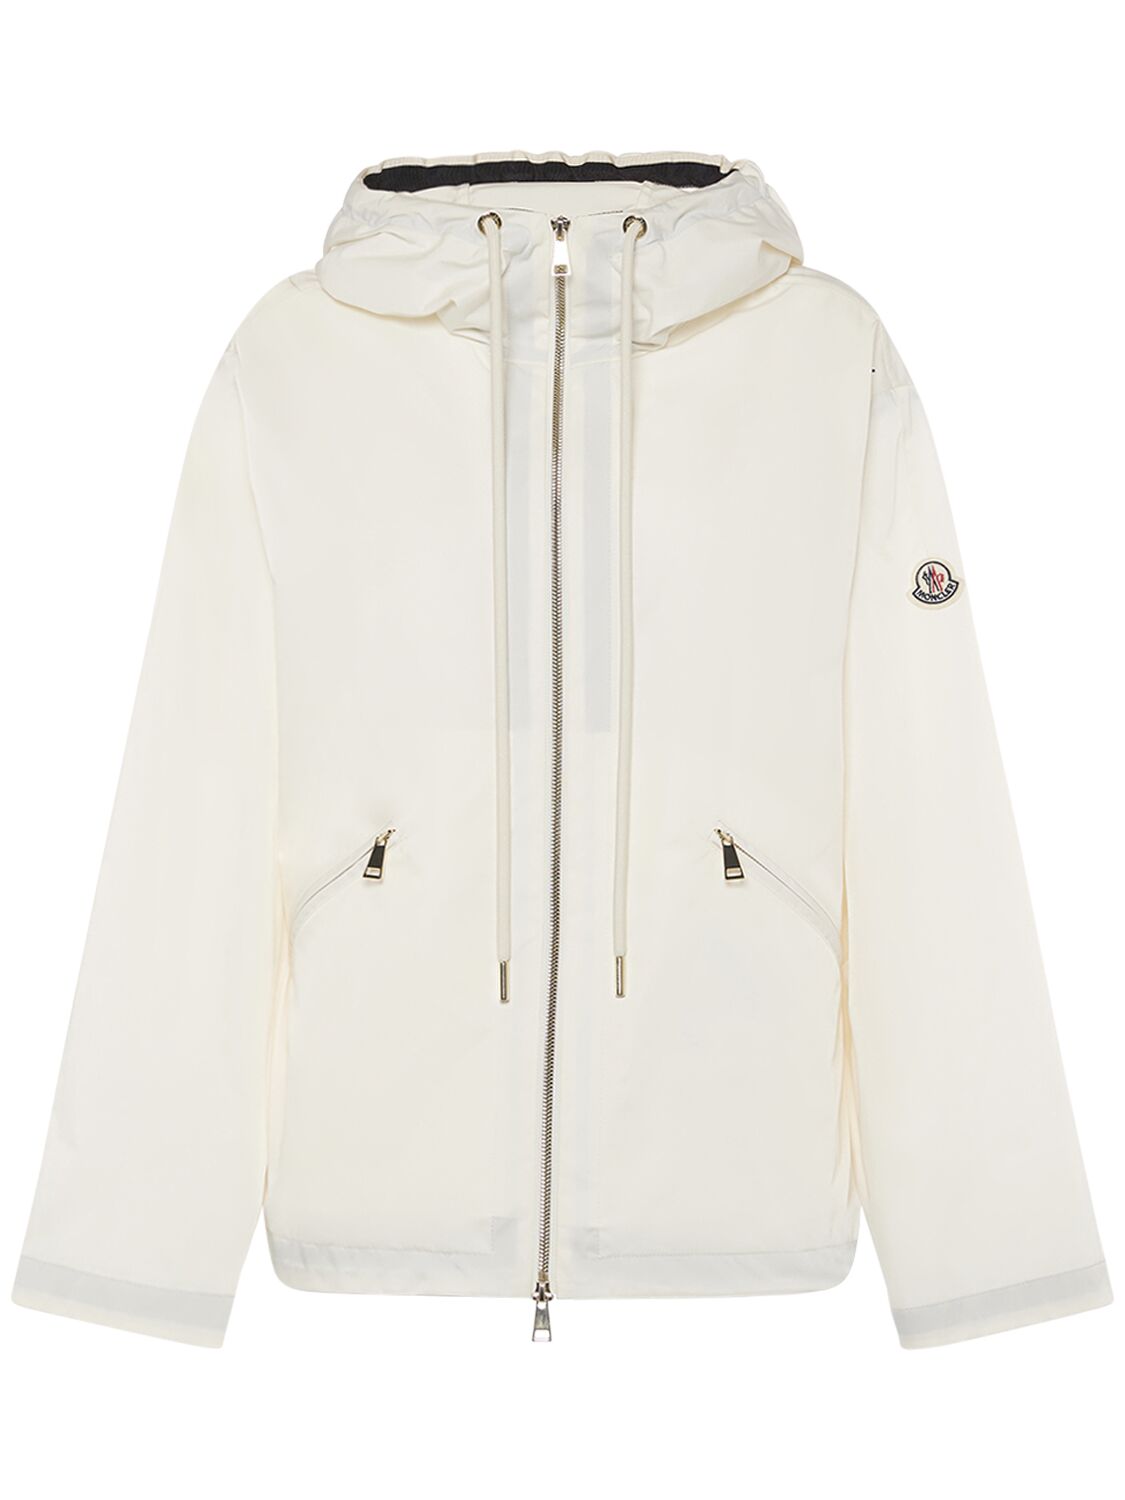 Moncler Cassiopea科技织物连帽夹克 In White